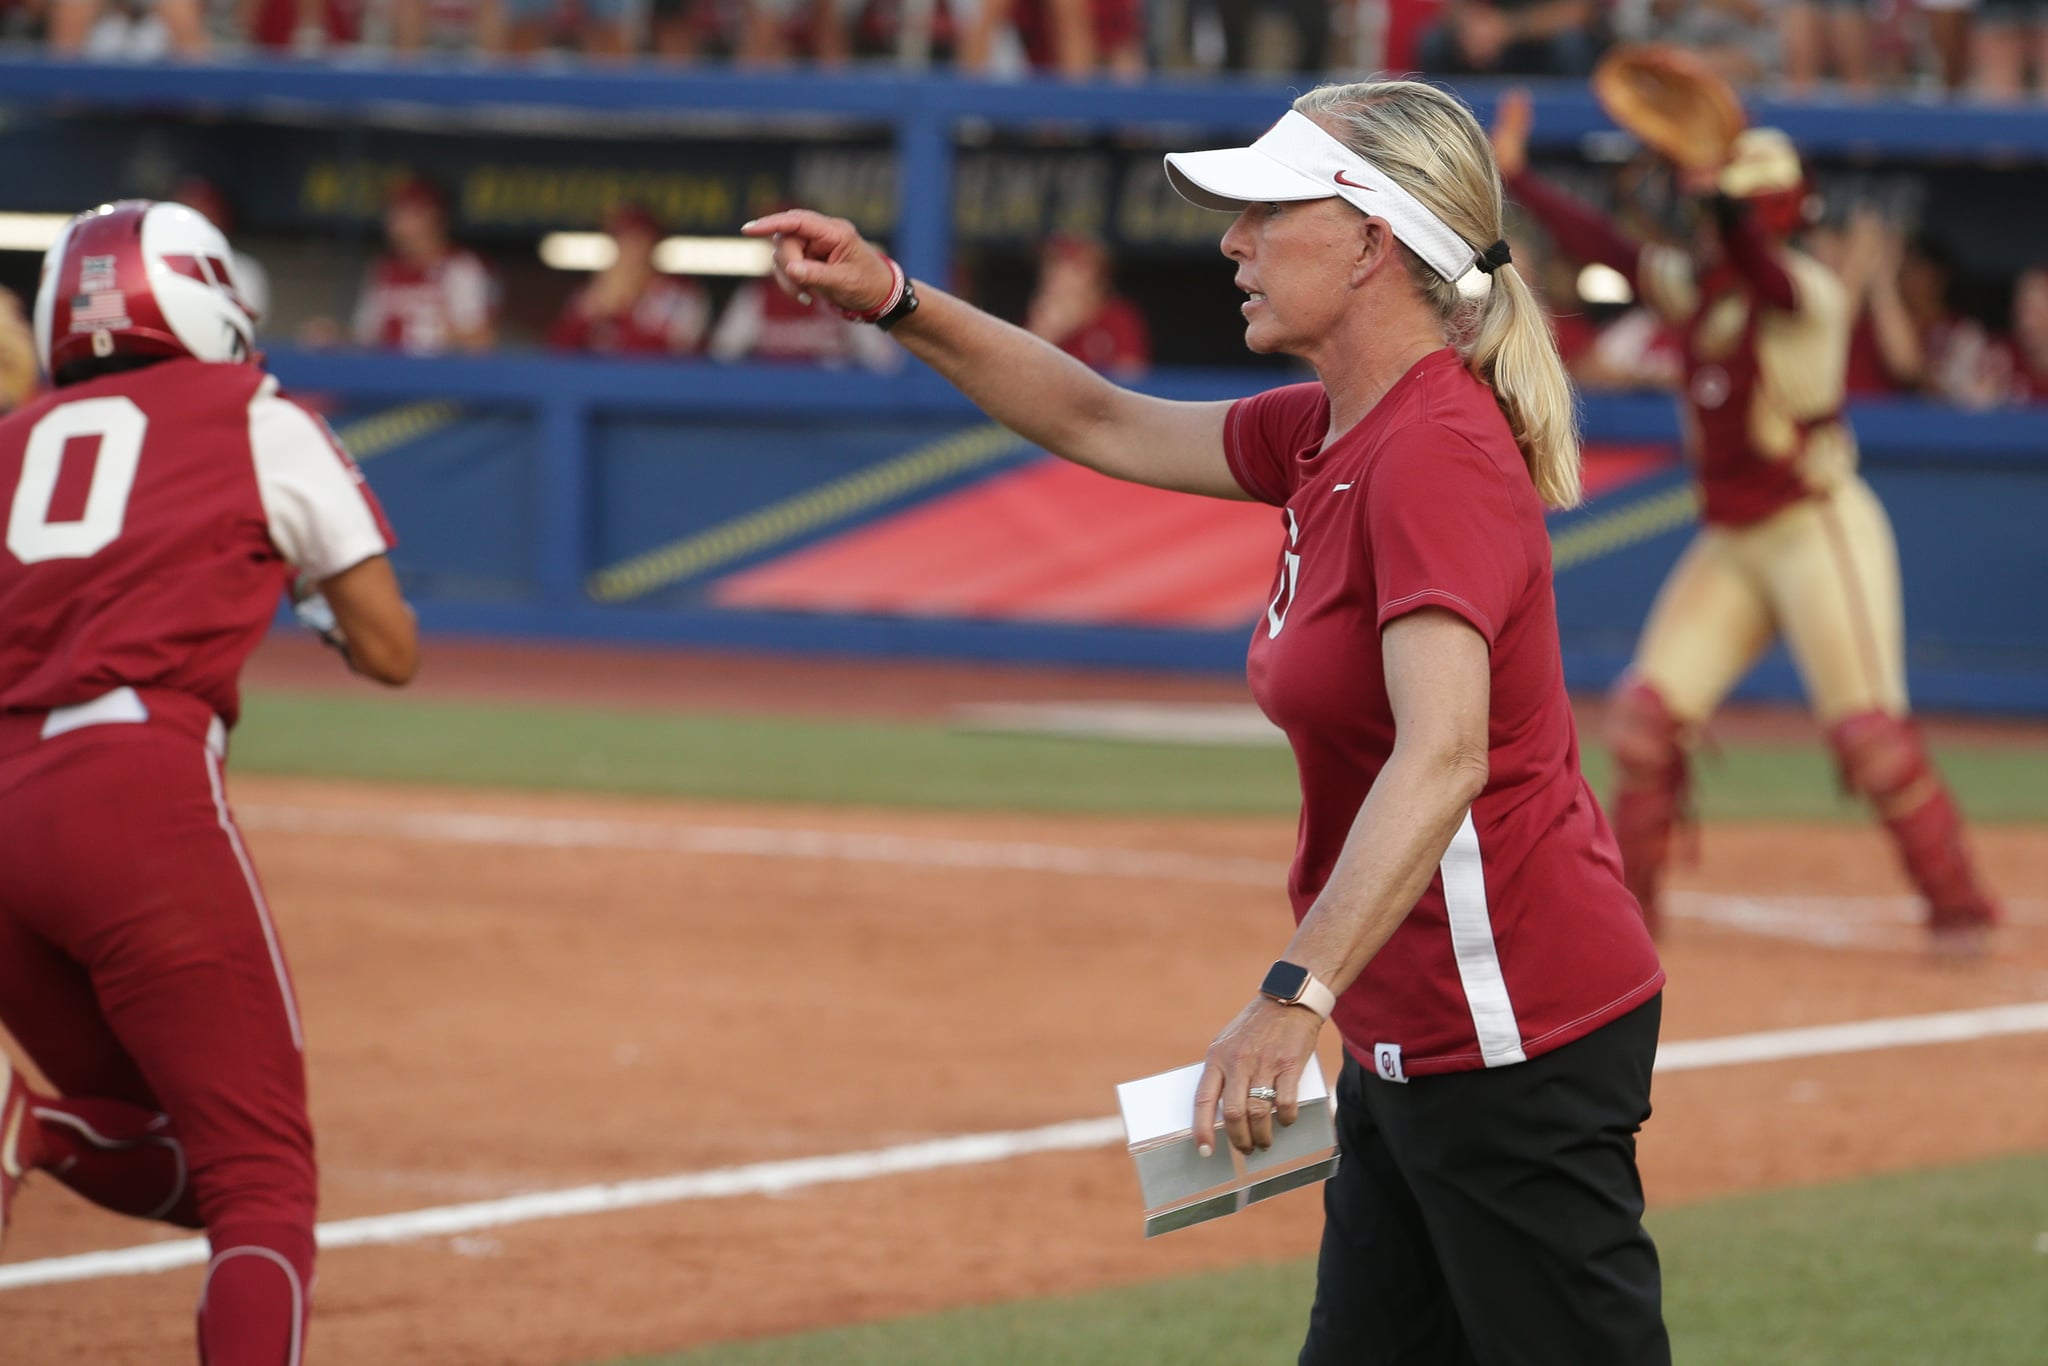 OKLAHOMA CITY, OK - JUNE 09: Head coach Patty Gasso of the Oklahoma Sooners directs her team from the third base line during the Division I Women's Softball Championship held at ASA Hall of Fame Stadium on June 9, 2021 in Oklahoma City, Oklahoma. (Photo by Shane Bevel/NCAA Photos via Getty Images)